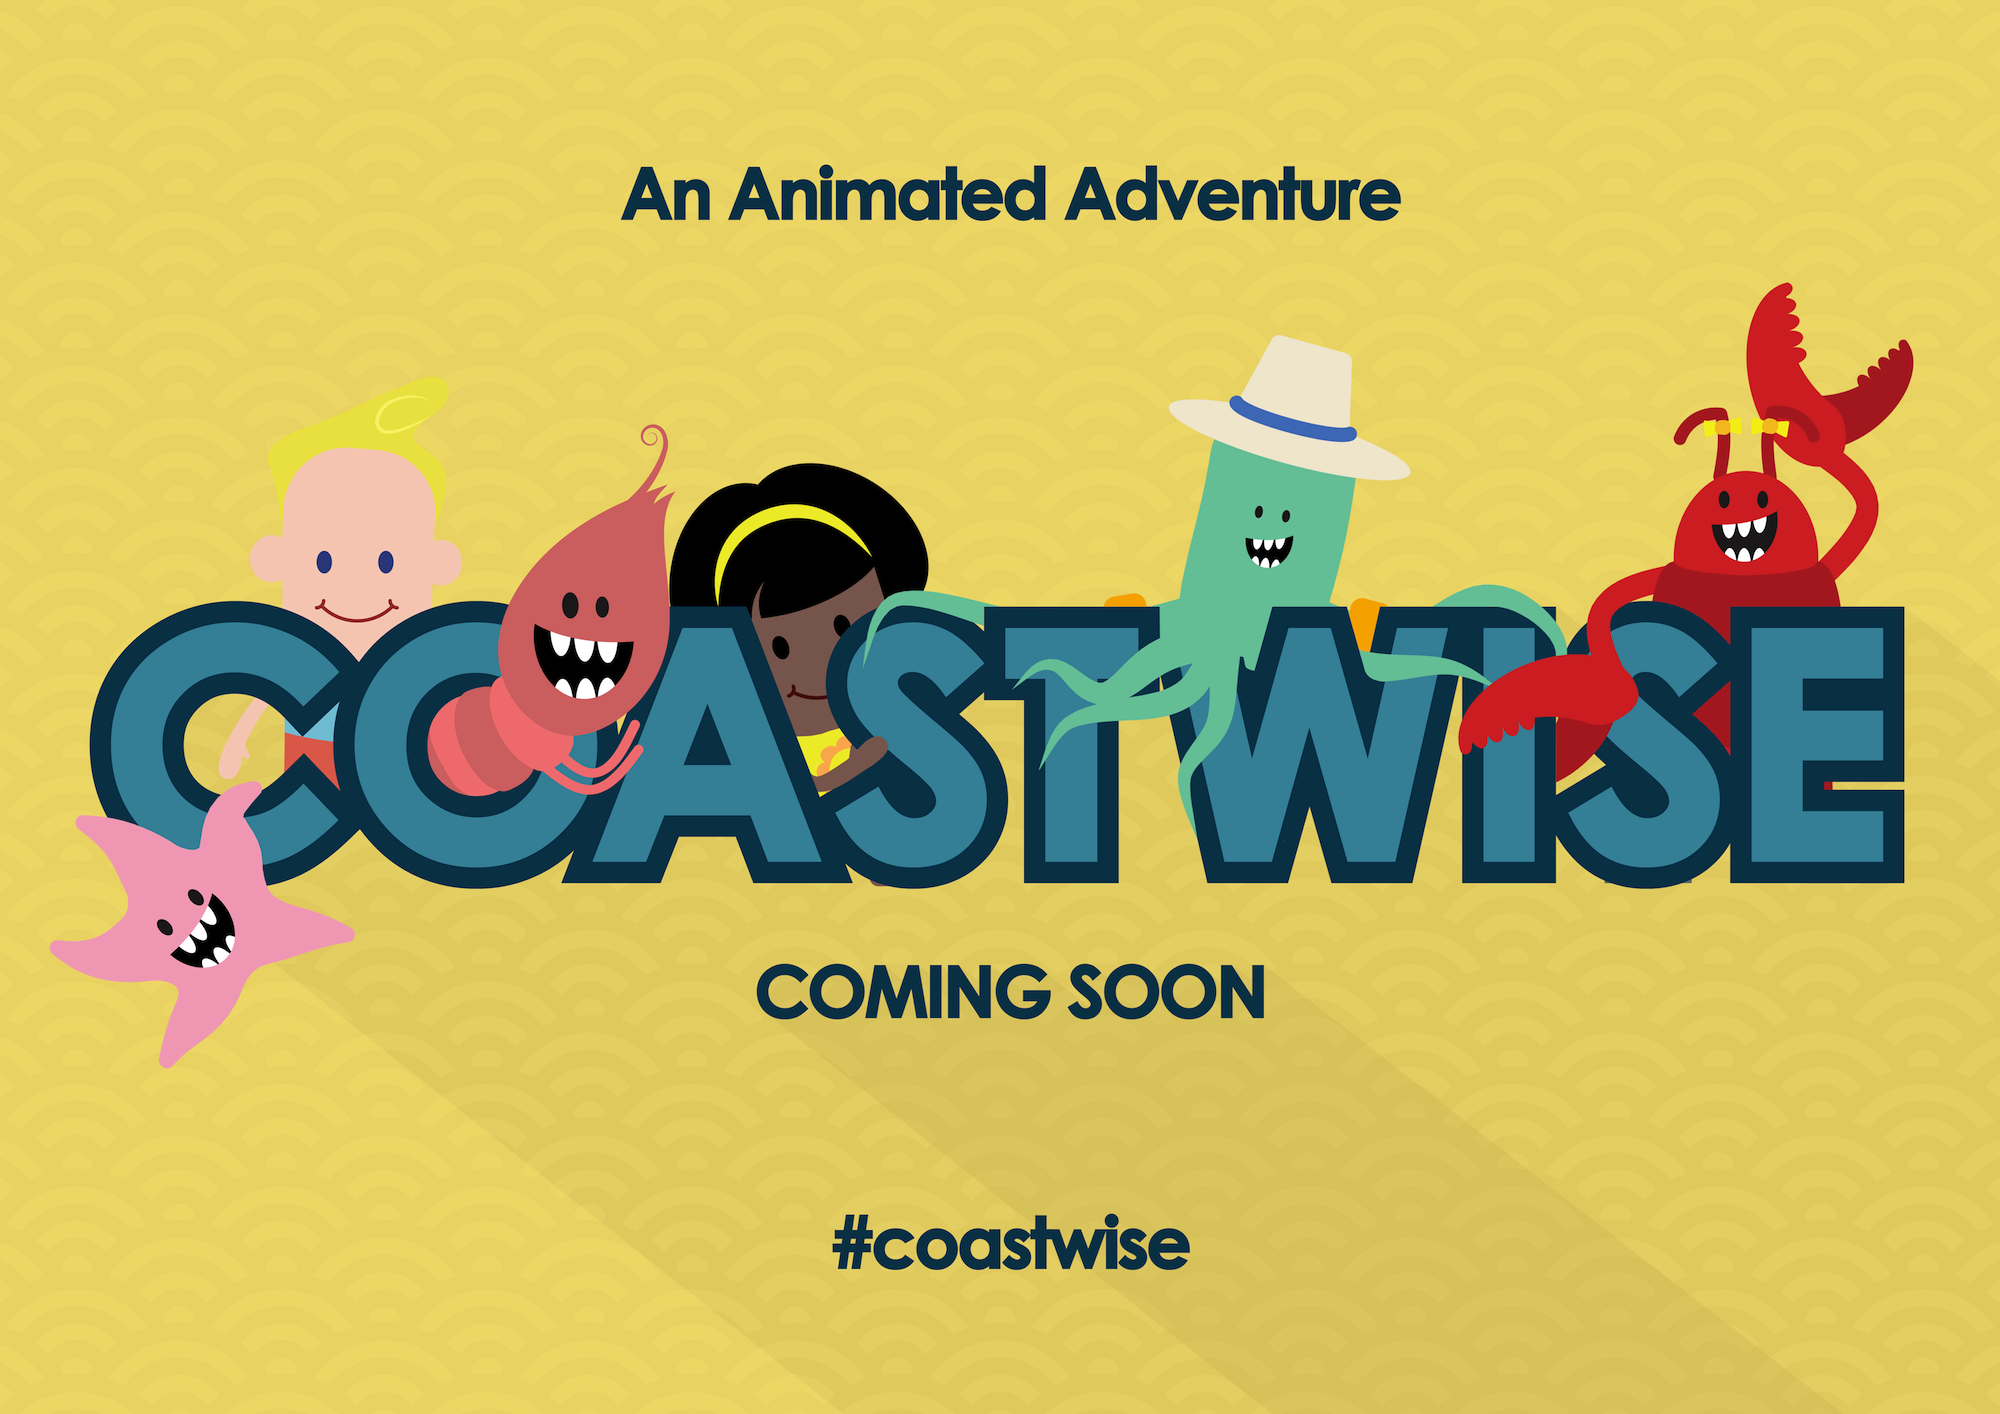 Coastwise is an animated adventure, coming soon!